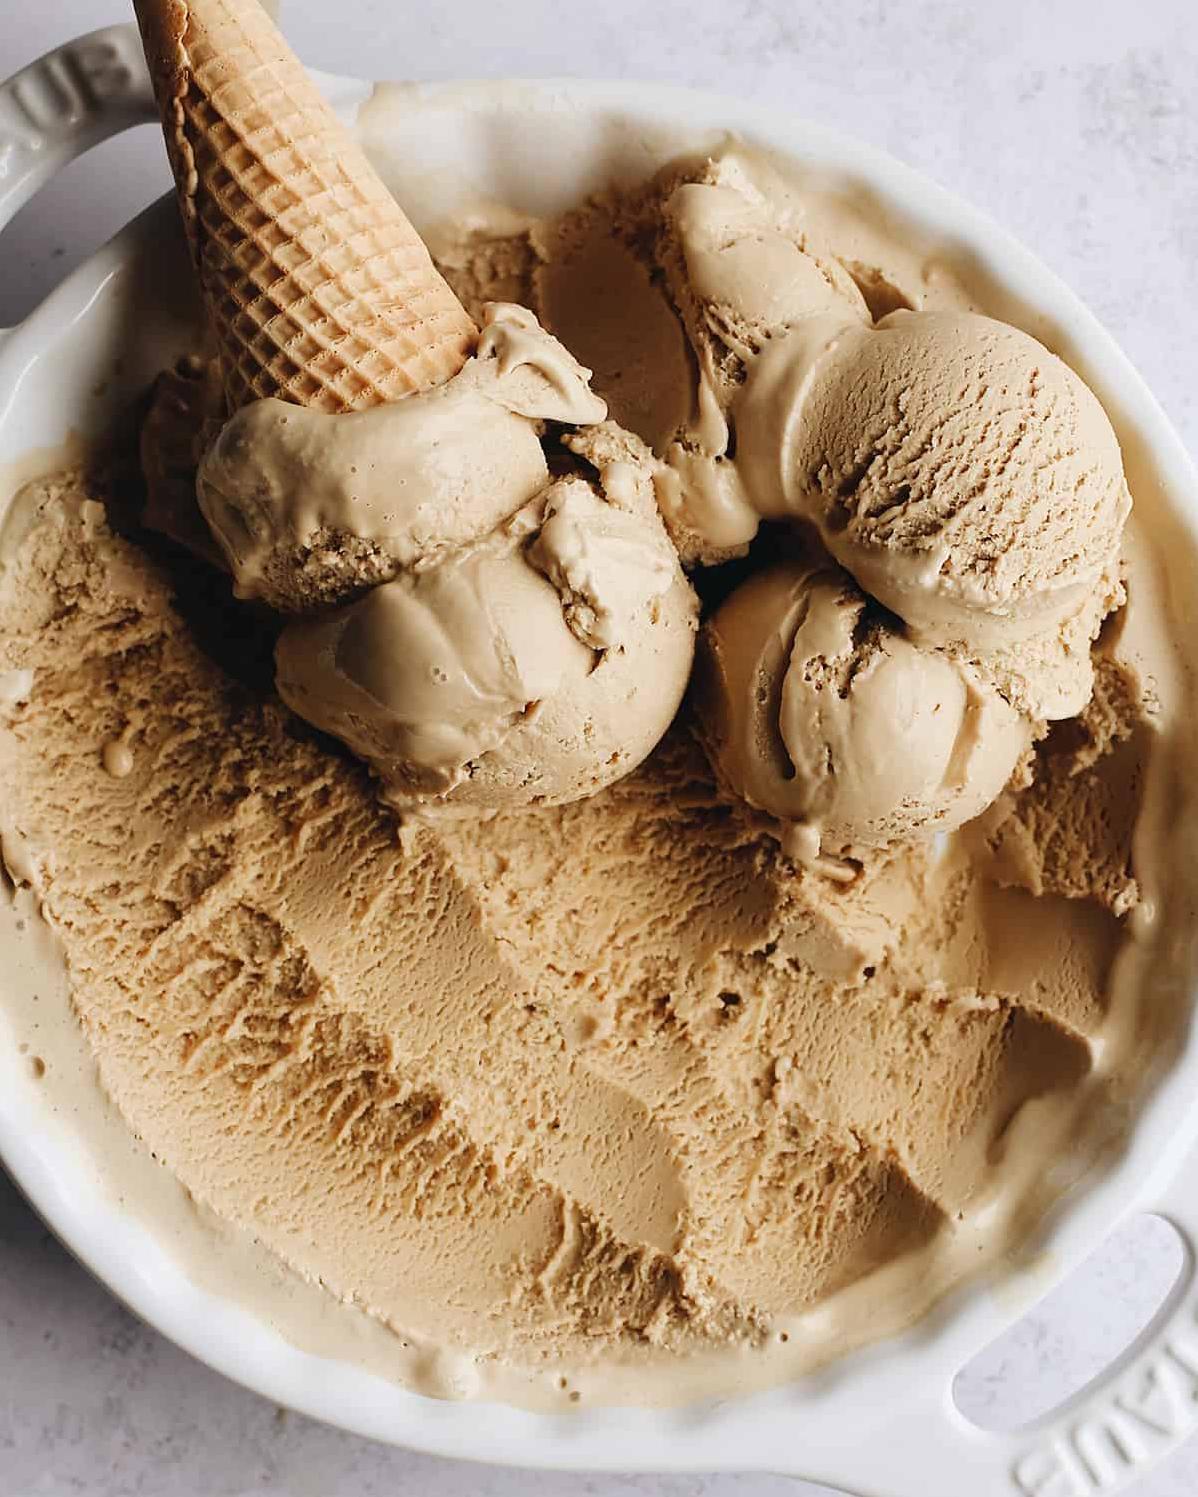  Chill out with this Lighter Coffee Ice Cream recipe! I promise it's worth melting for.